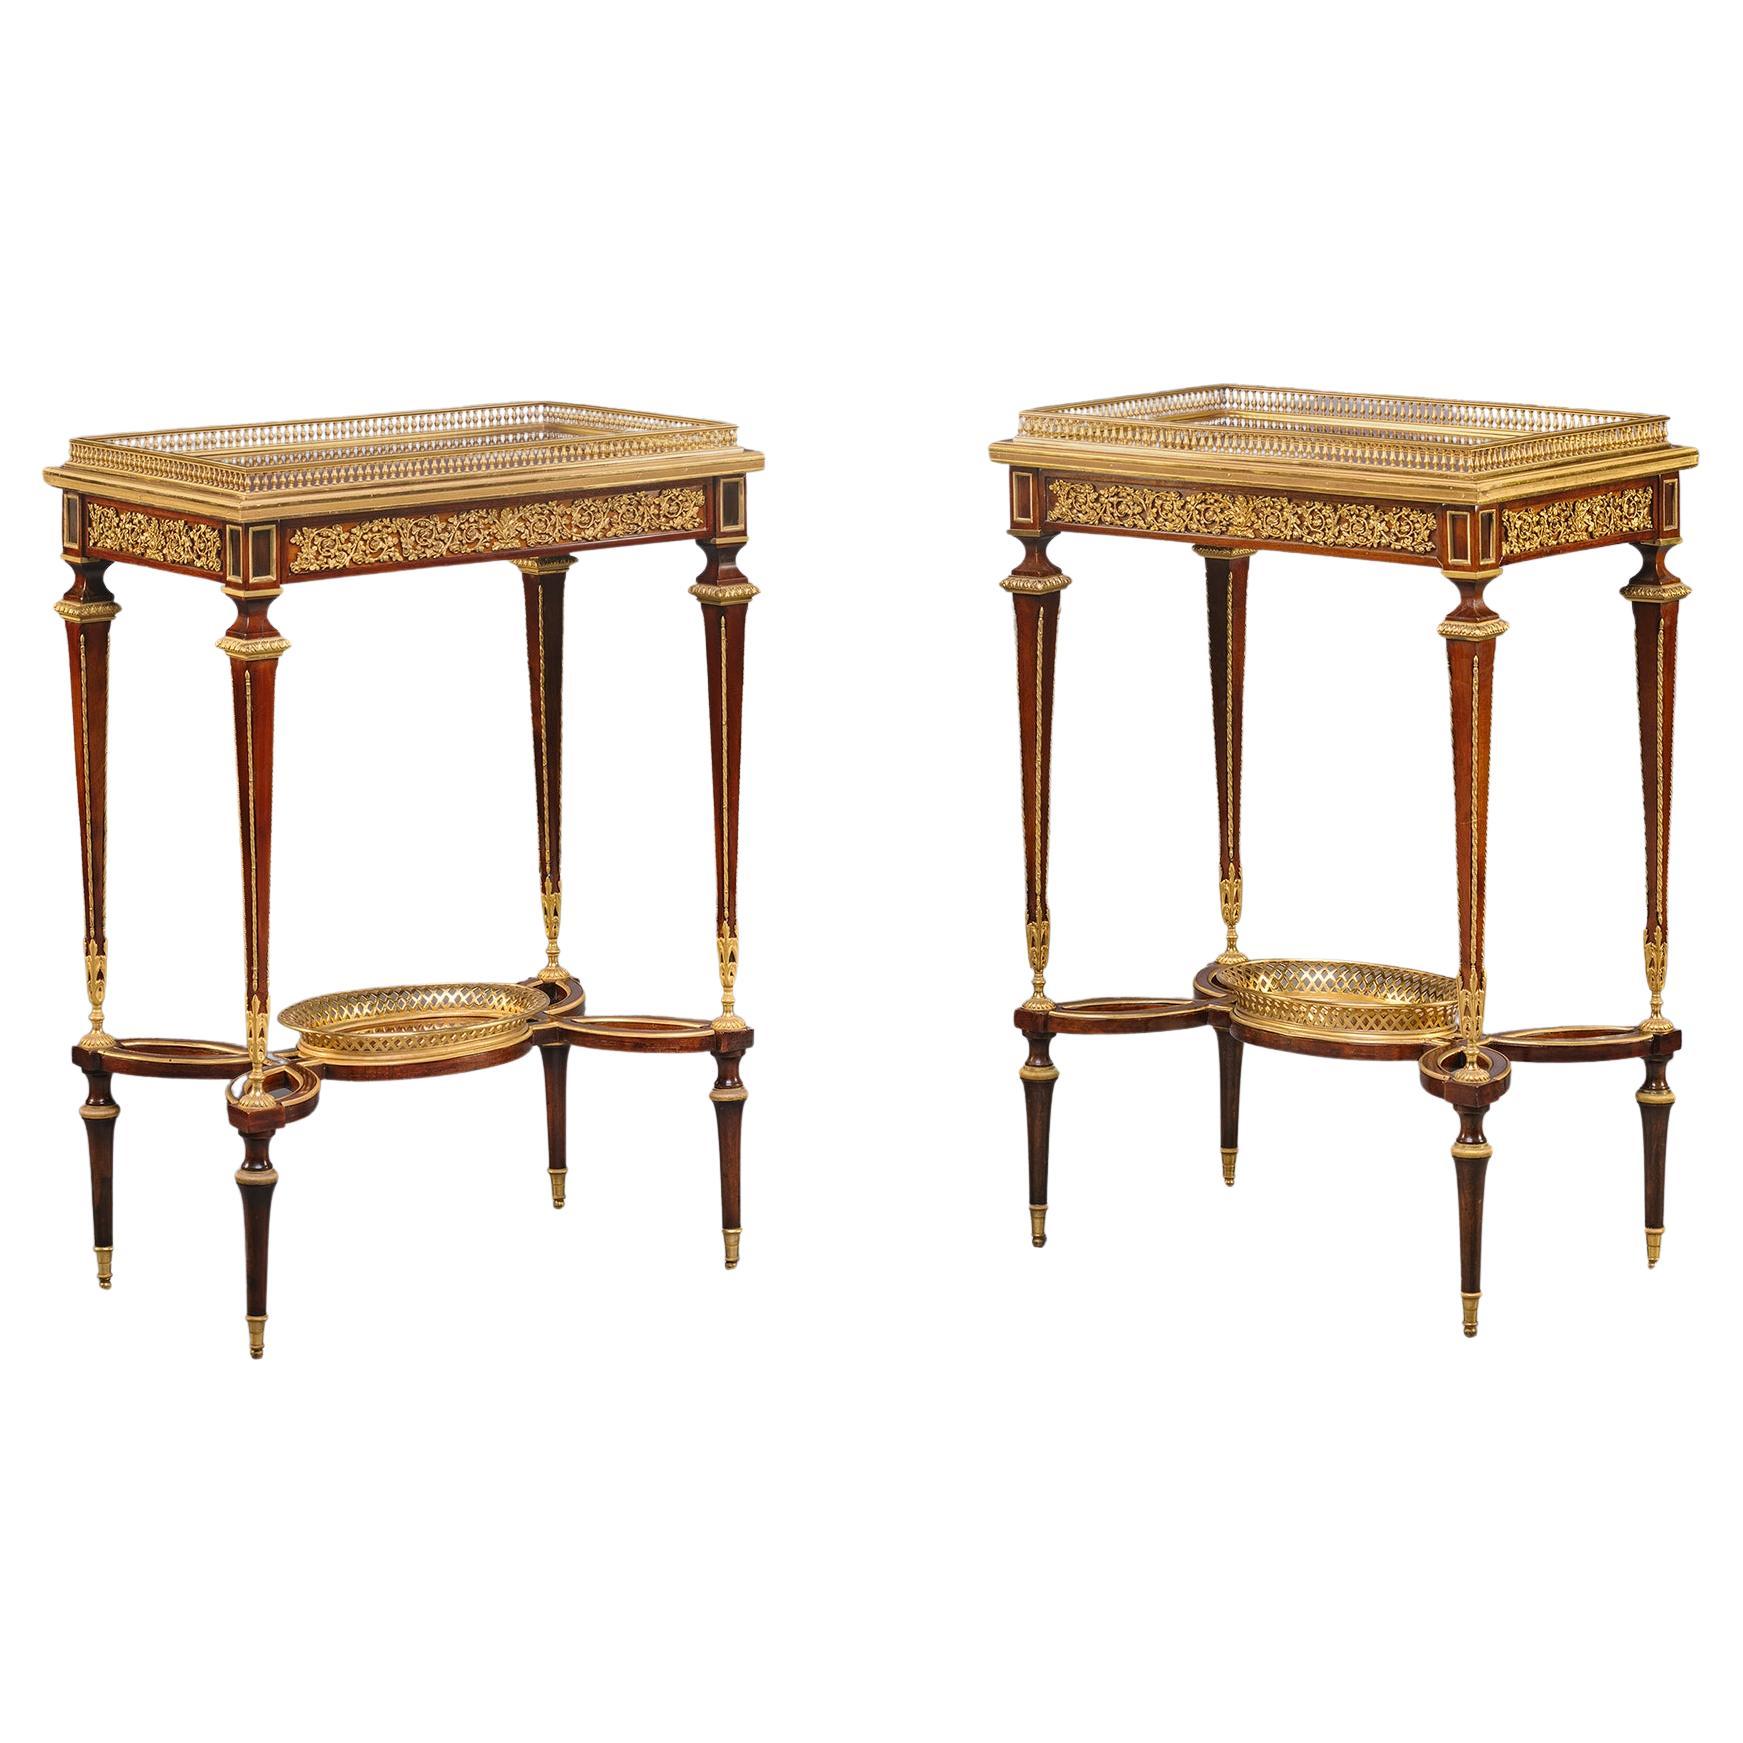 A Fine Pair of Louis XVI Style Gilt-Bronze Mounted Mahogany Occasional Tables For Sale